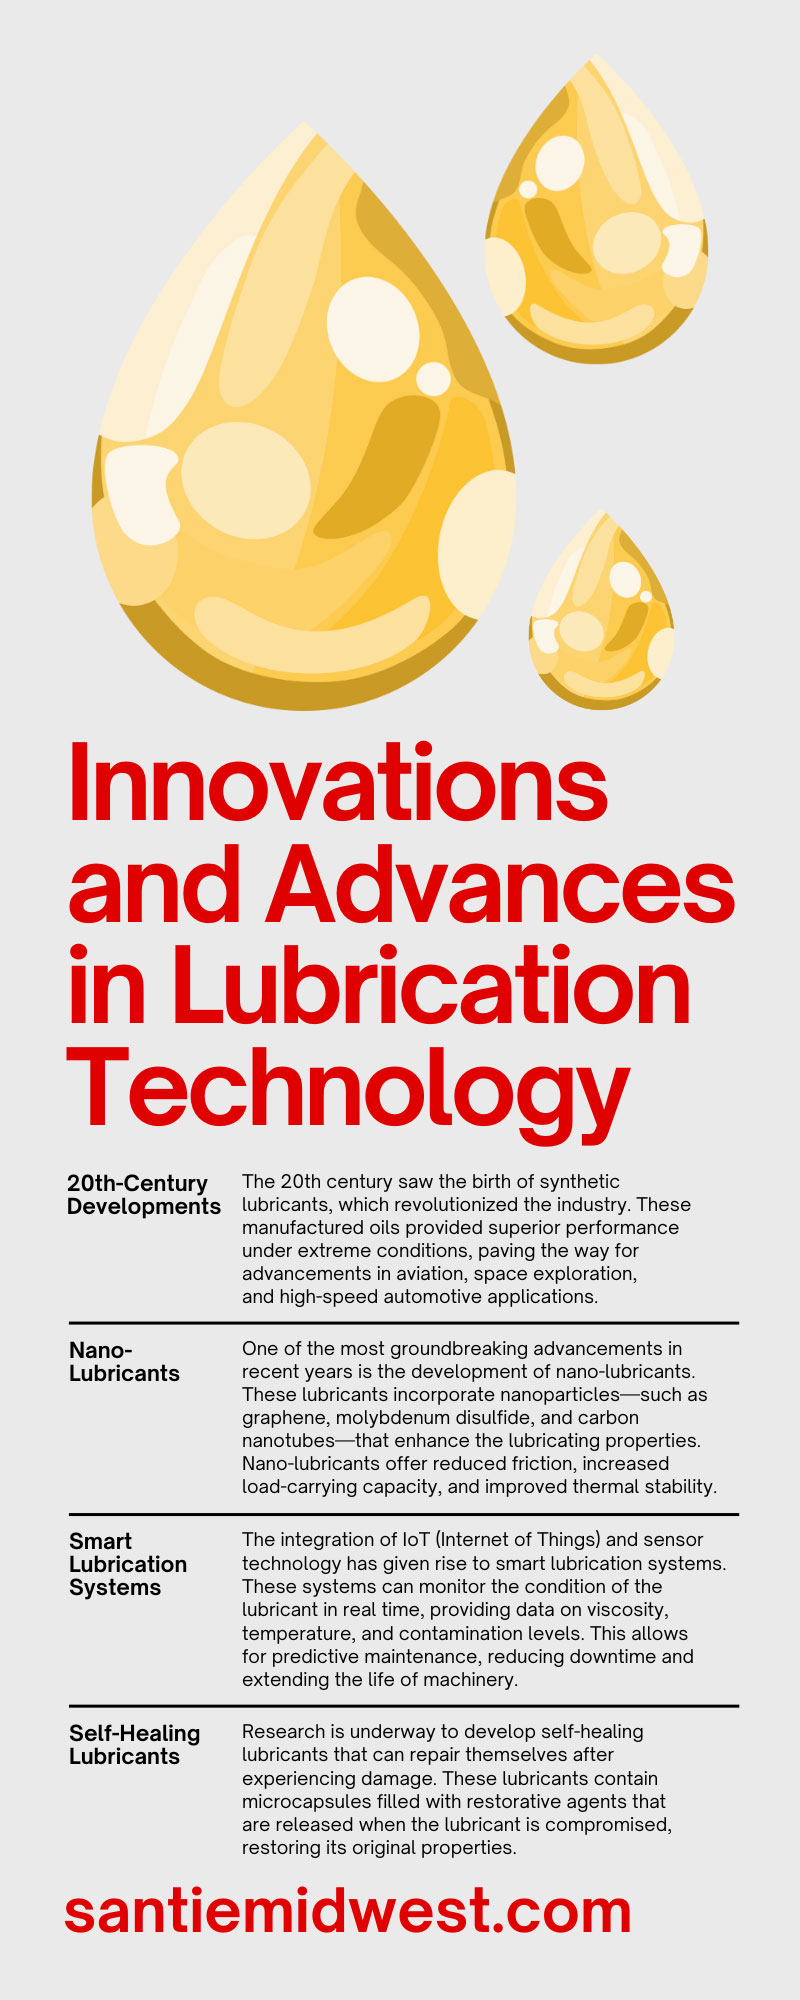 Innovations and Advances in Lubrication Technology
